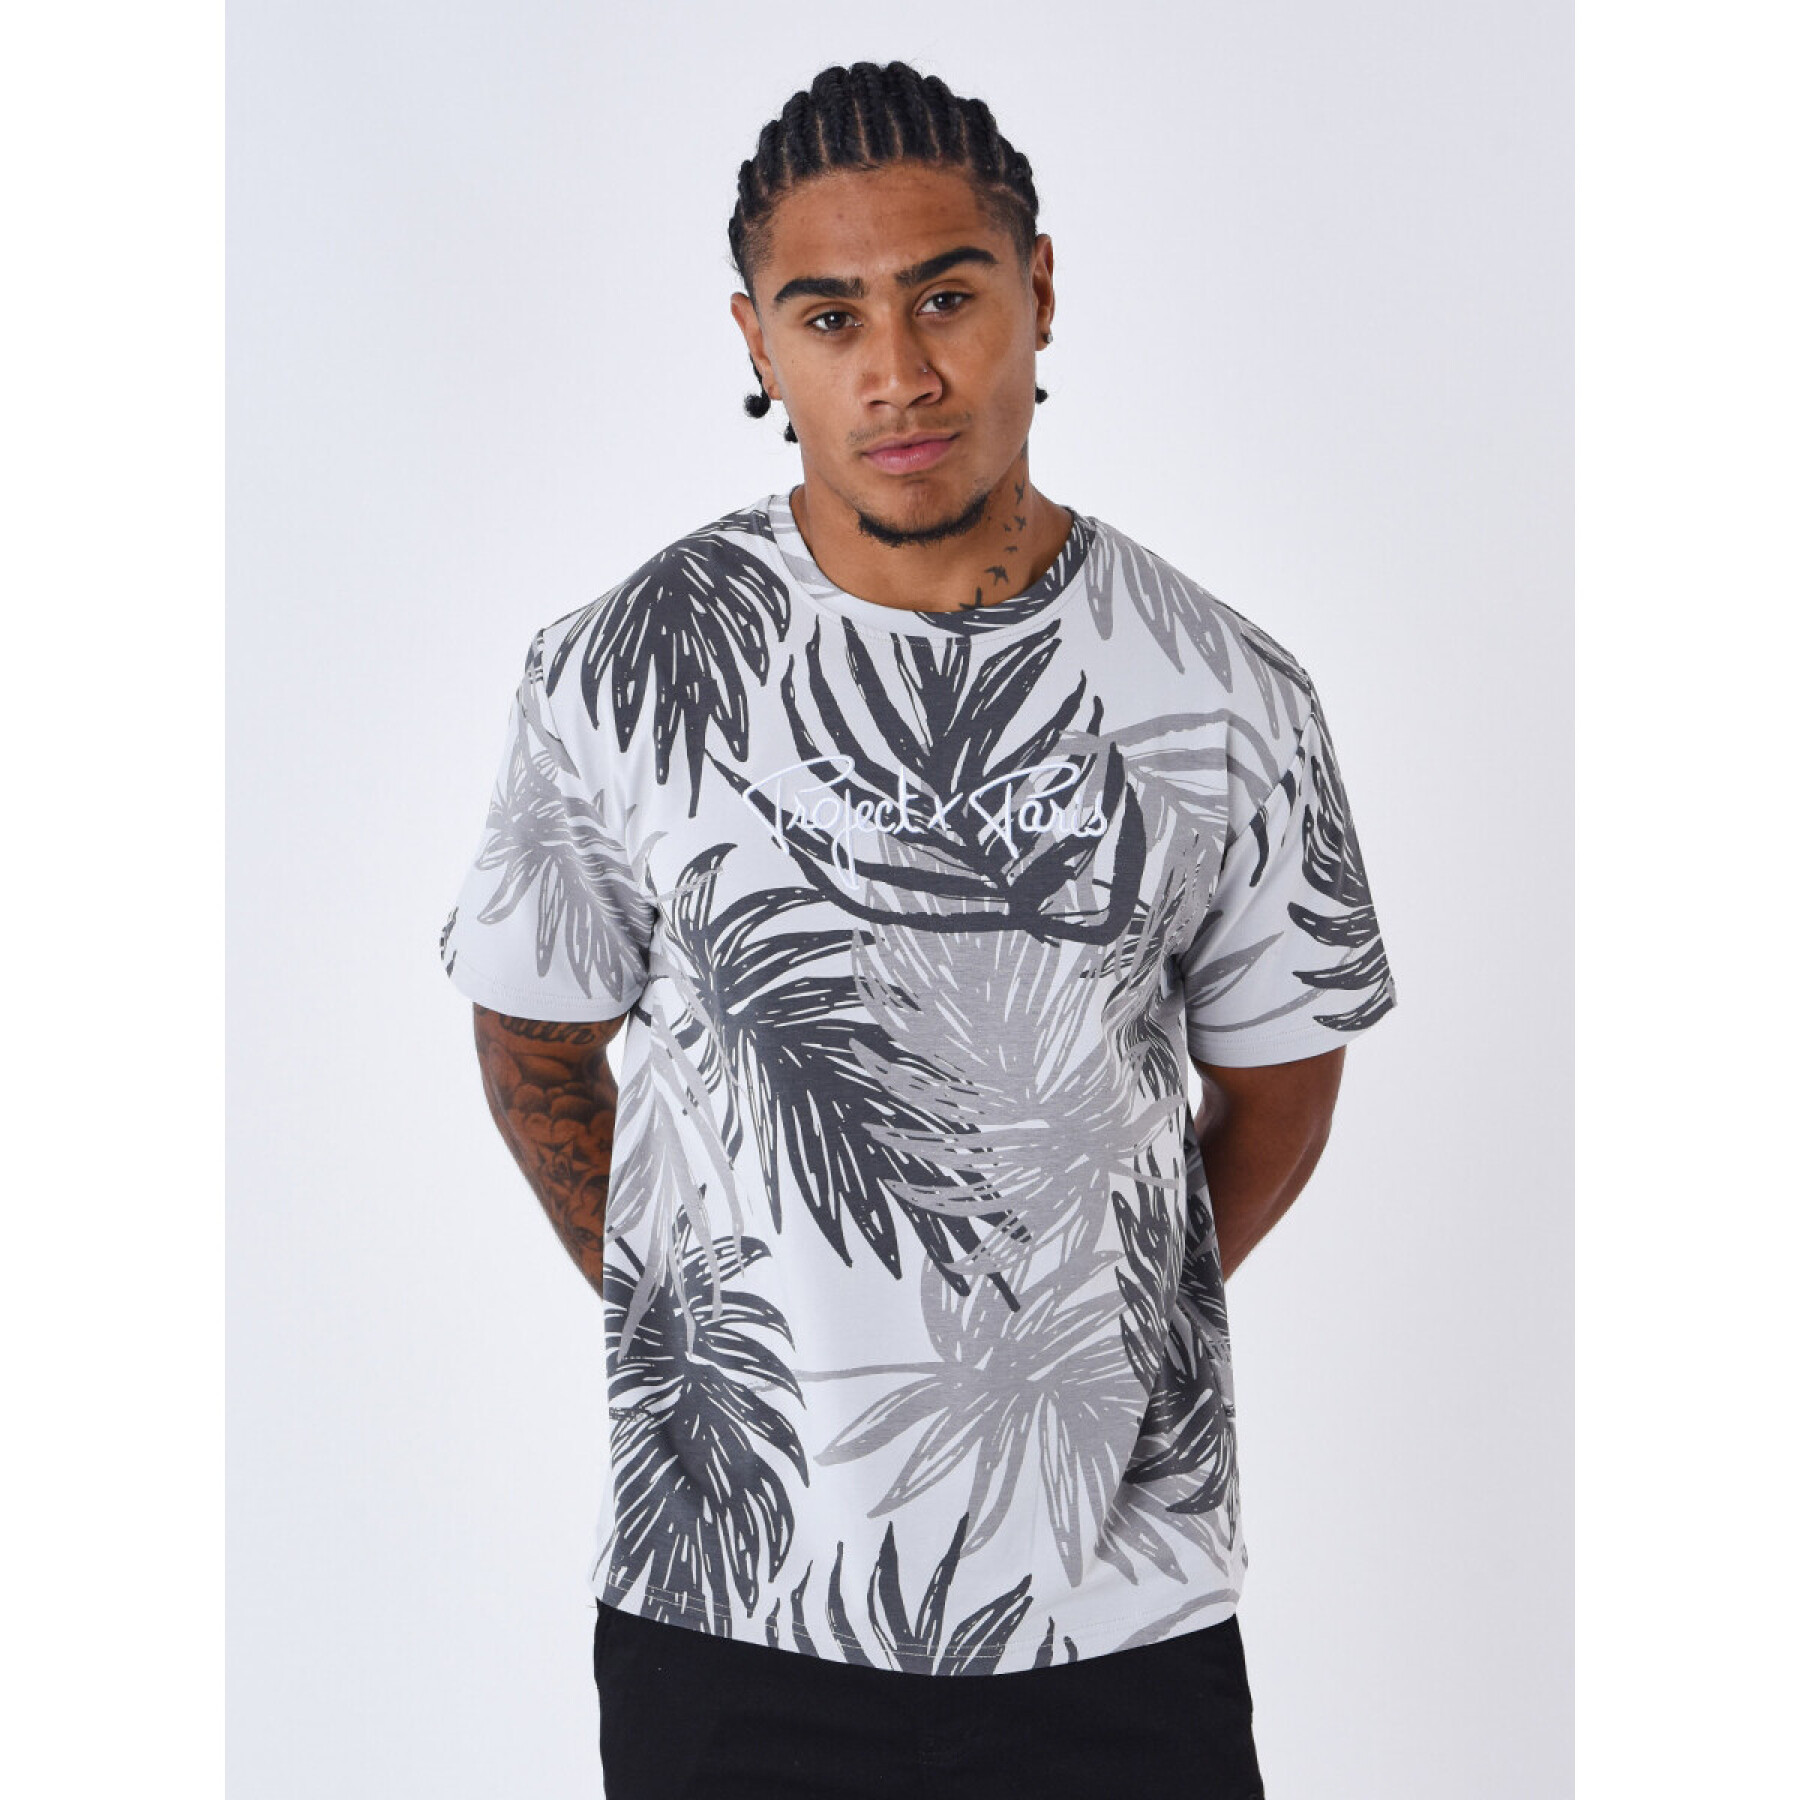 Camiseta All over palm leaves Project X Paris